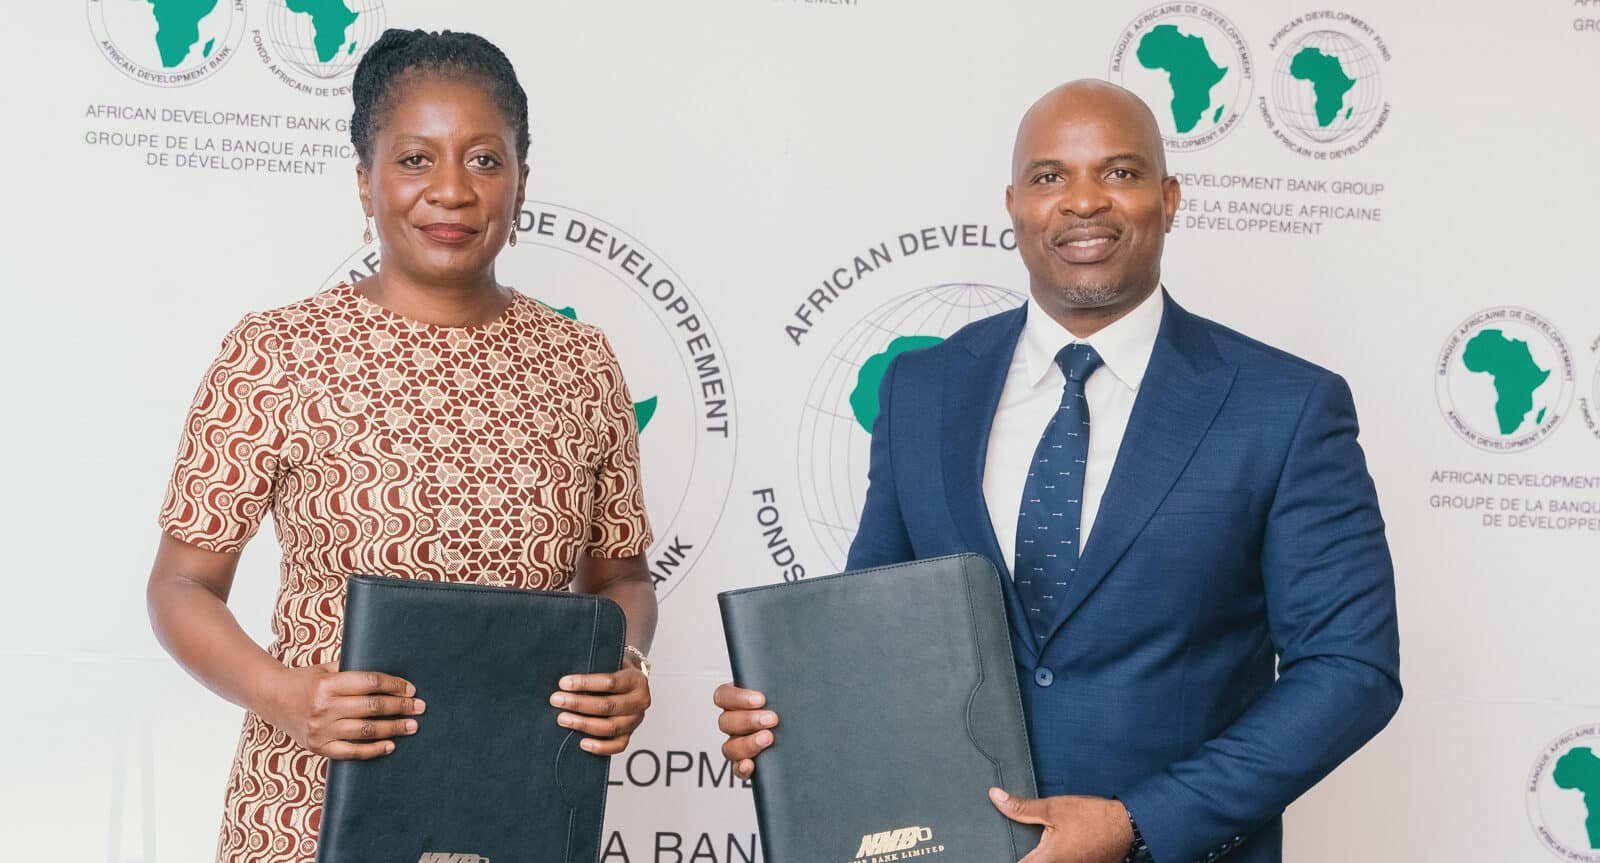 AfDB Country Manager for Zimbabwe Moono Mupotola and Gerald Gore NMB Bank CEO at the signing of an agreement for a $15 m trade facility in Harare | Report Focus News